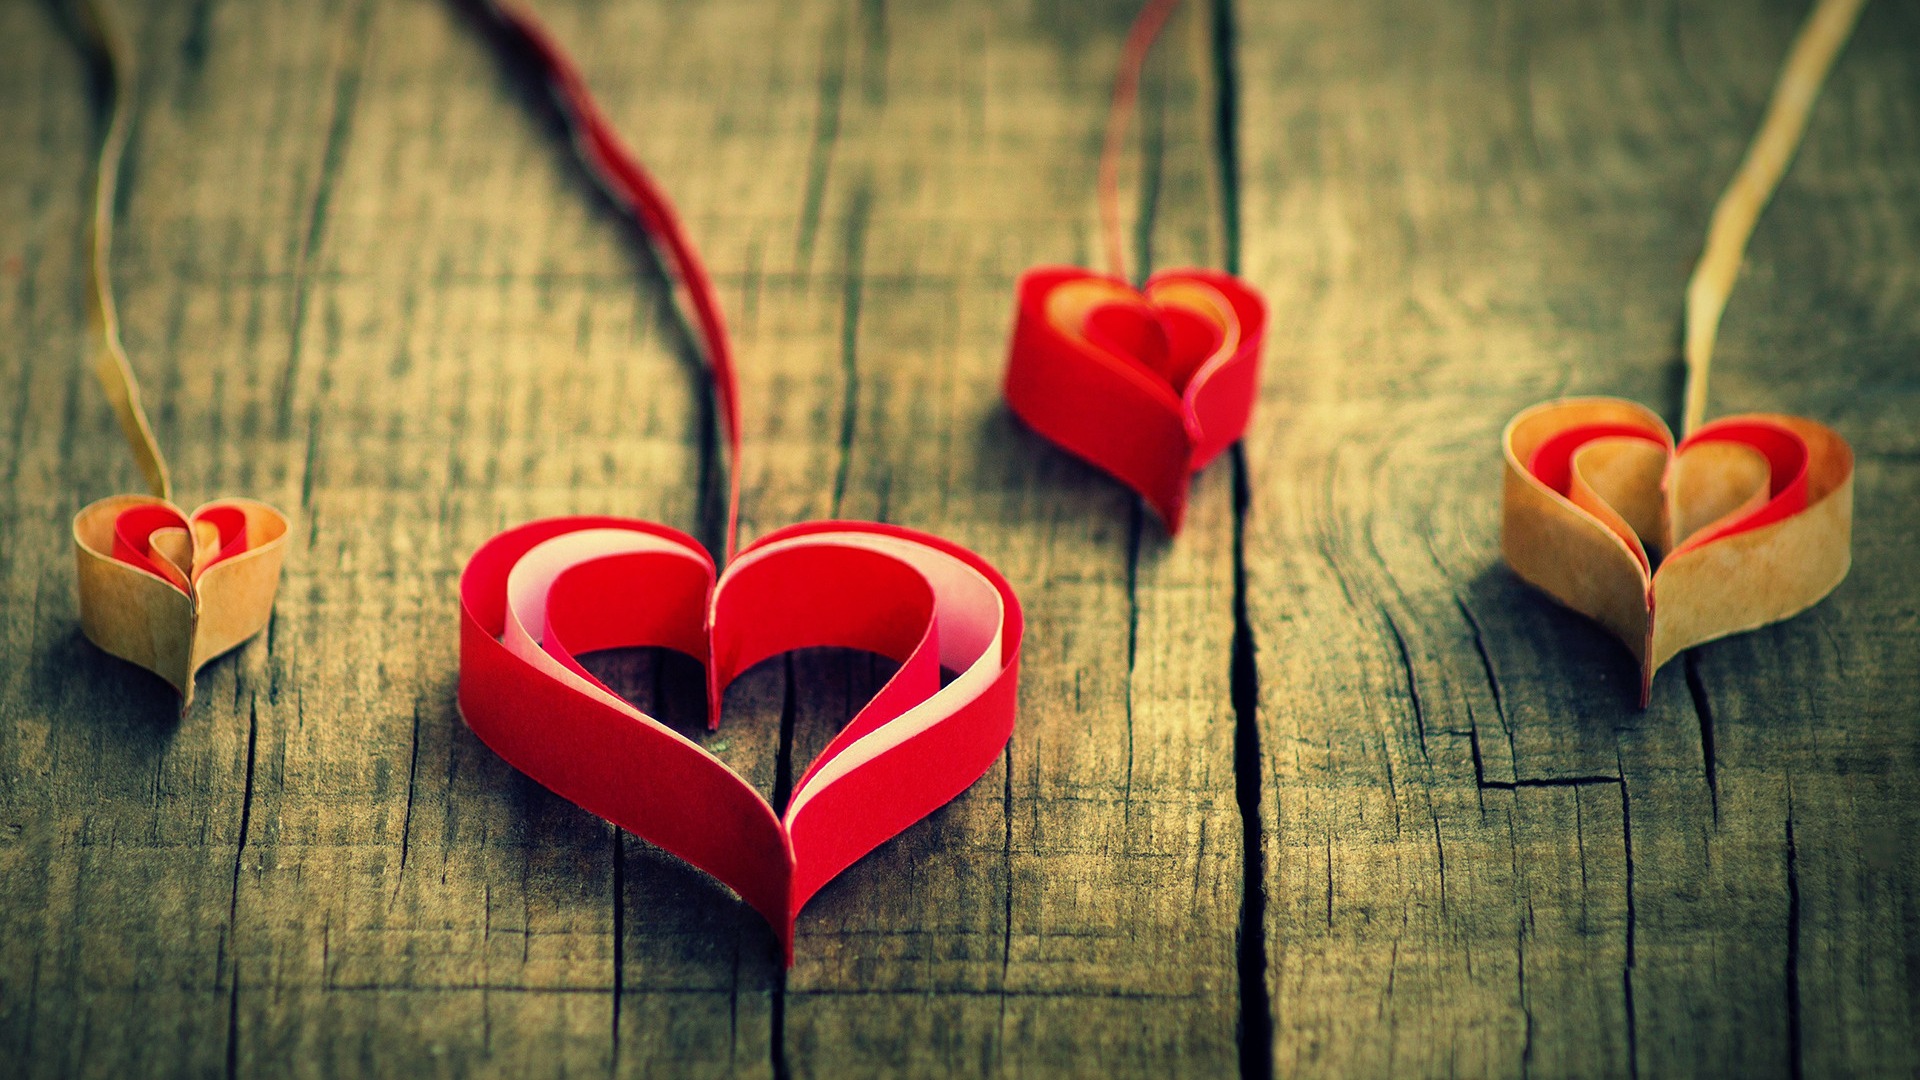 The theme of love, creative heart-shaped HD wallpapers #3 - 1920x1080